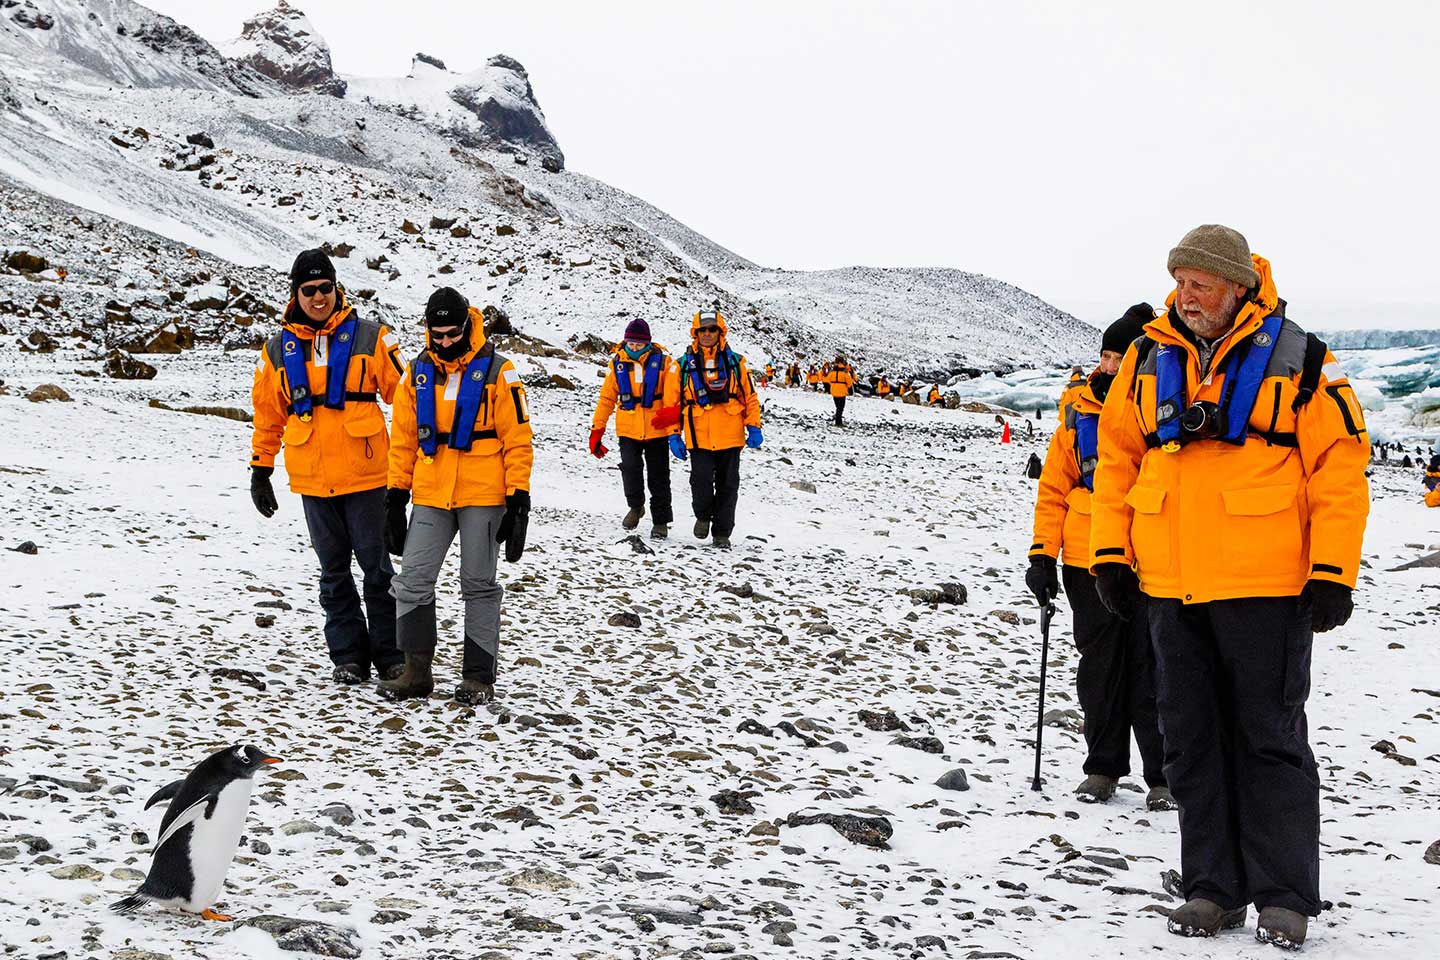 Quark Expeditions guests encounter resident wildlife on a walk in Antarctica.